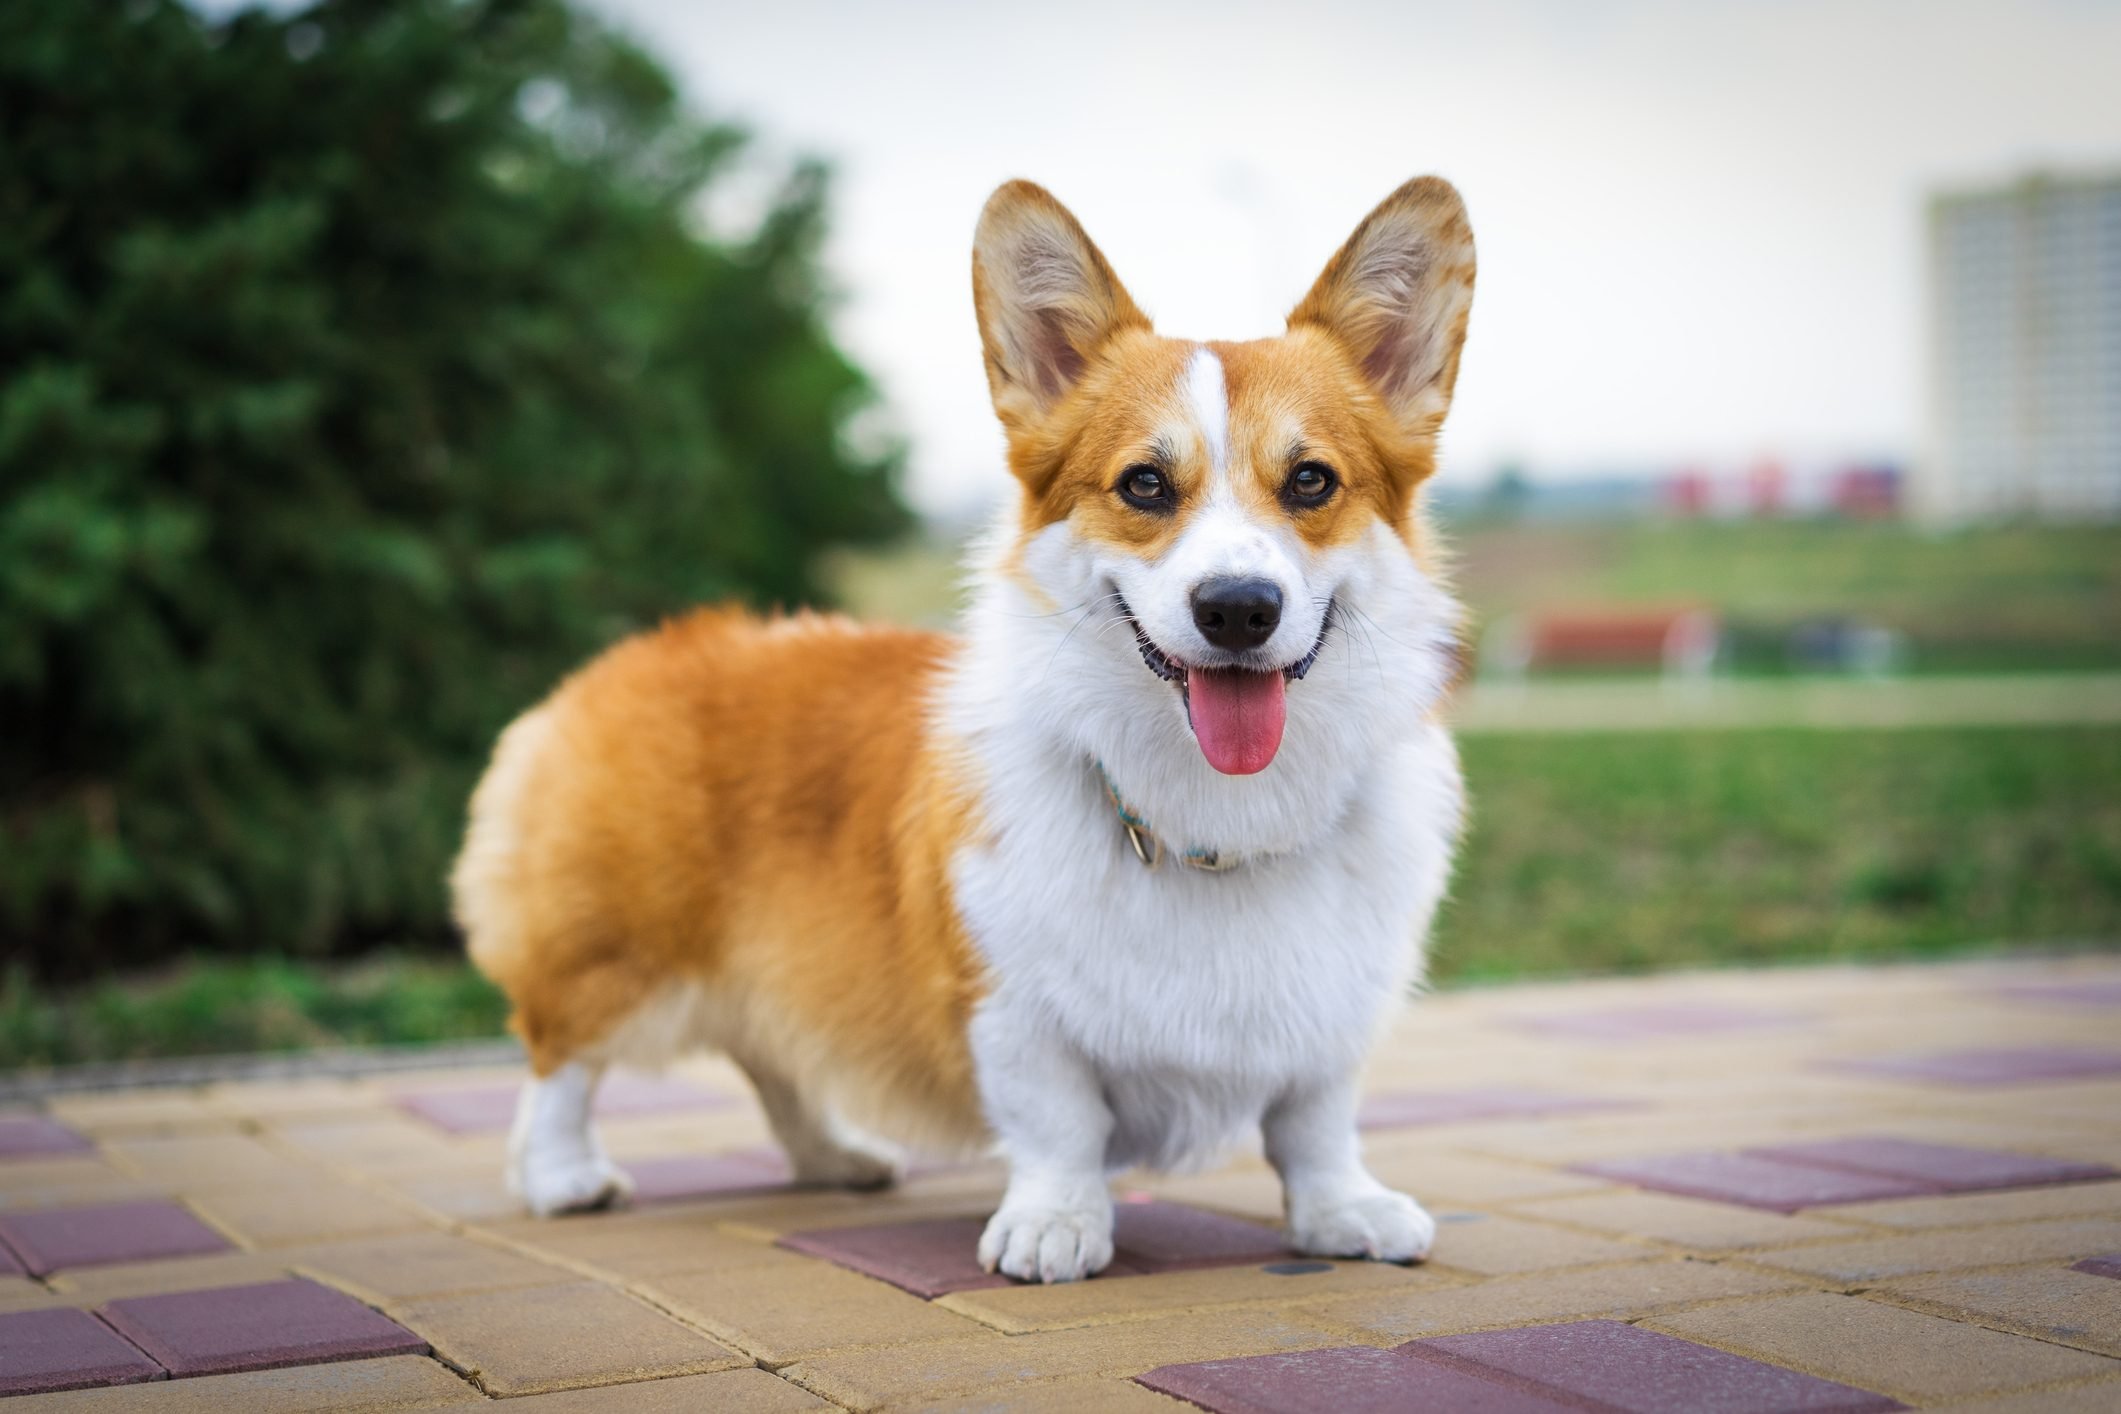 8 Short-Legged Dogs — Adorable Dogs with Short Legs